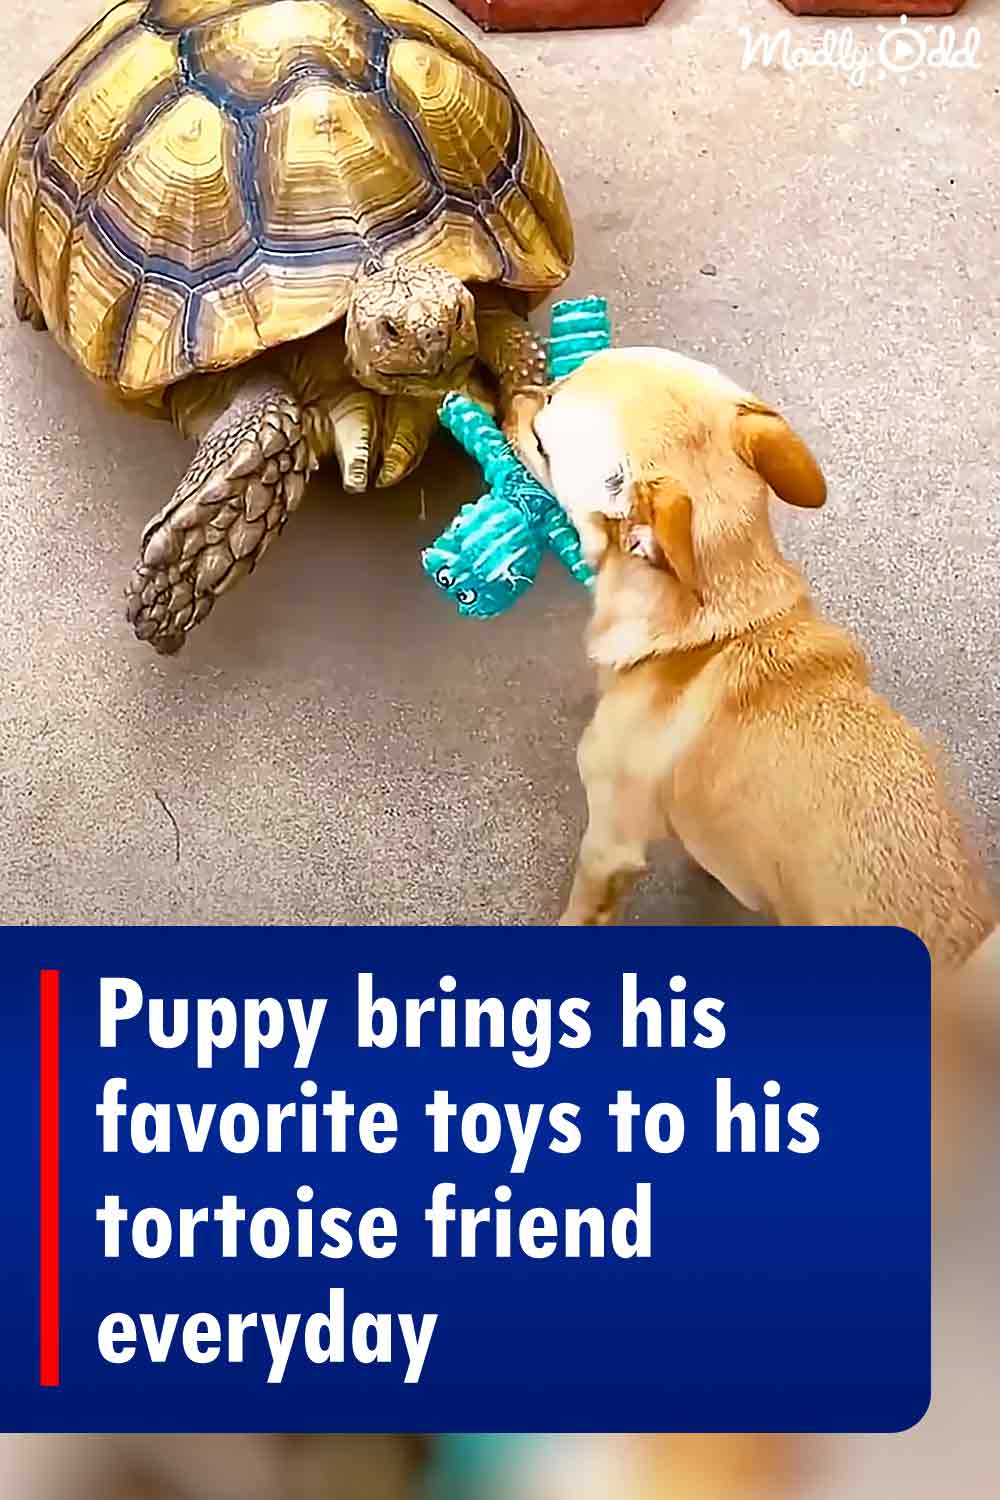 Puppy brings his favorite toys to his tortoise friend everyday